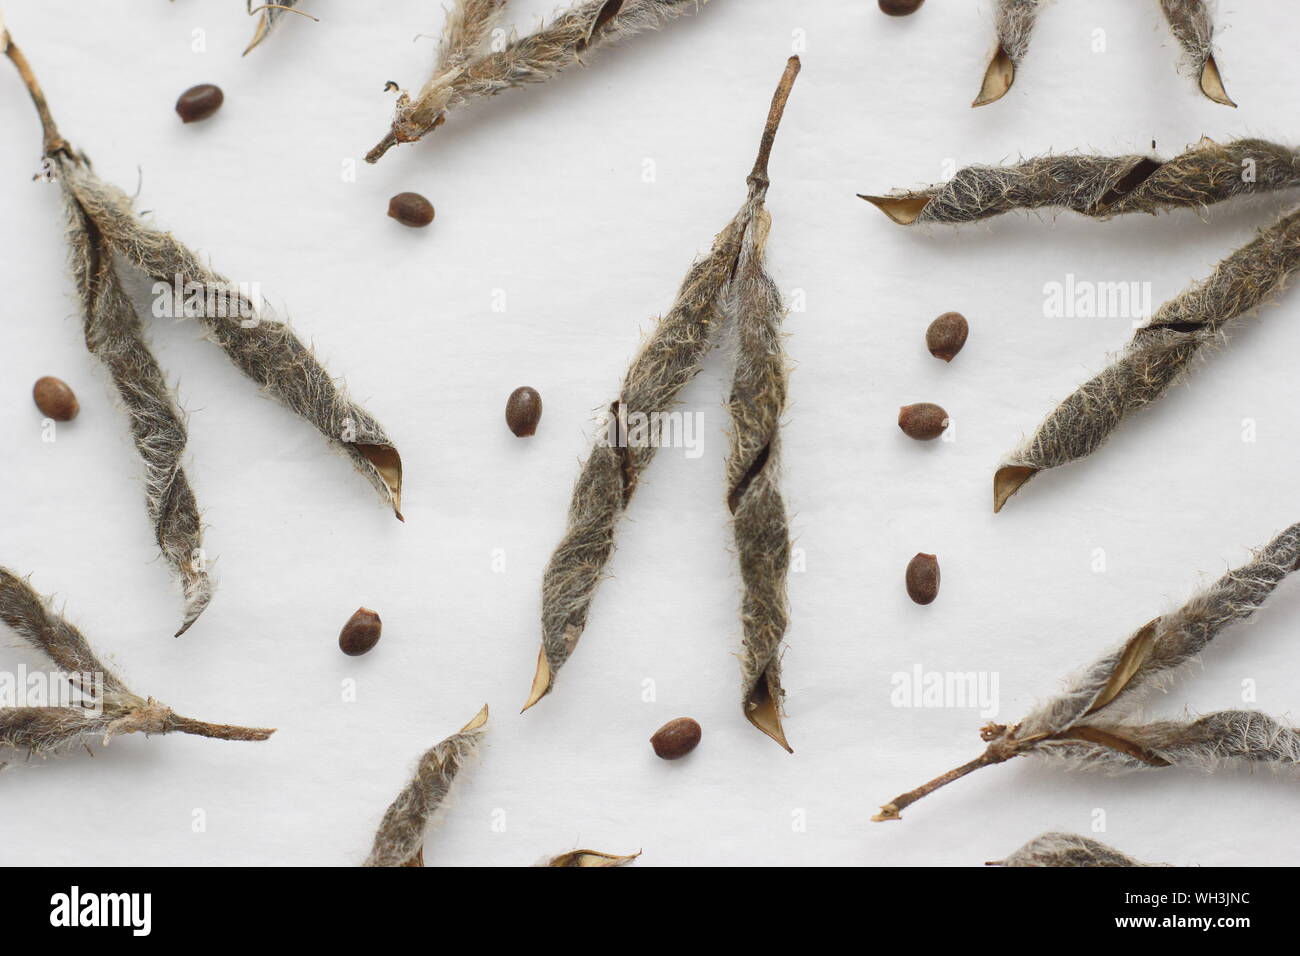 Lupinus. Lupin seeds and seed pods. UK Stock Photo